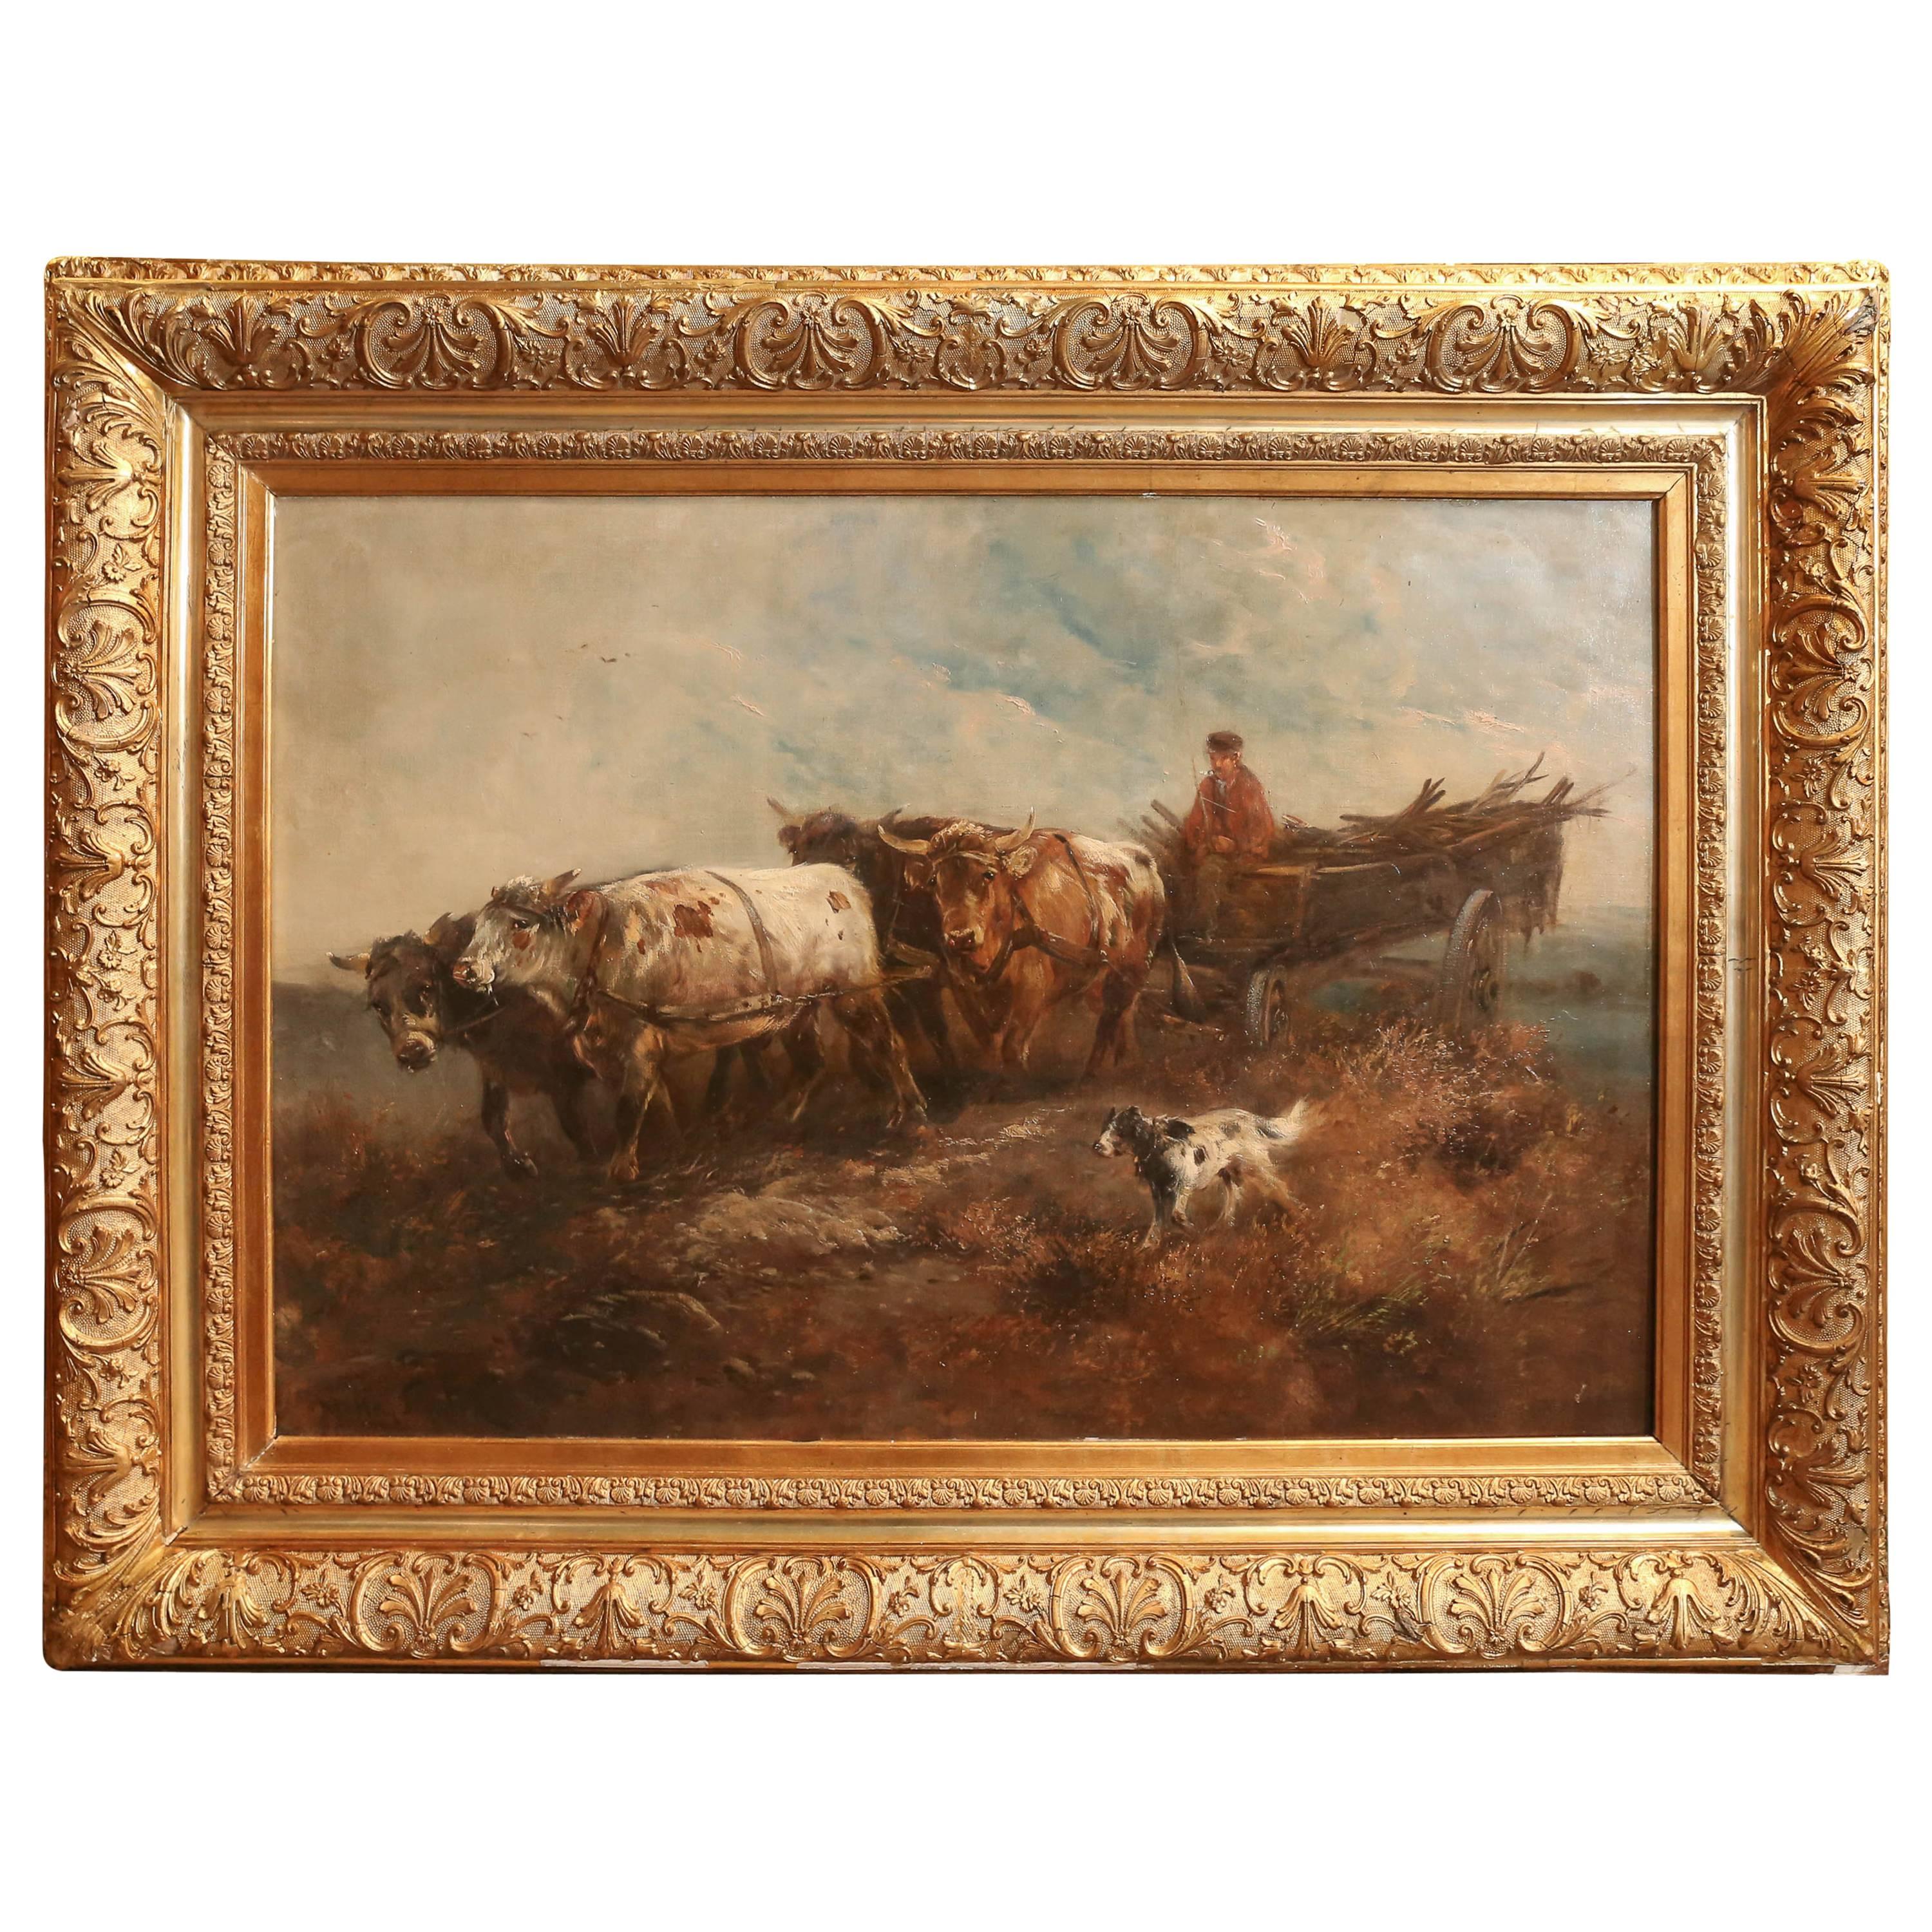 Oil Painting by Henry Schouten in a 19th Century  Giltwood Frame, "The Plow"